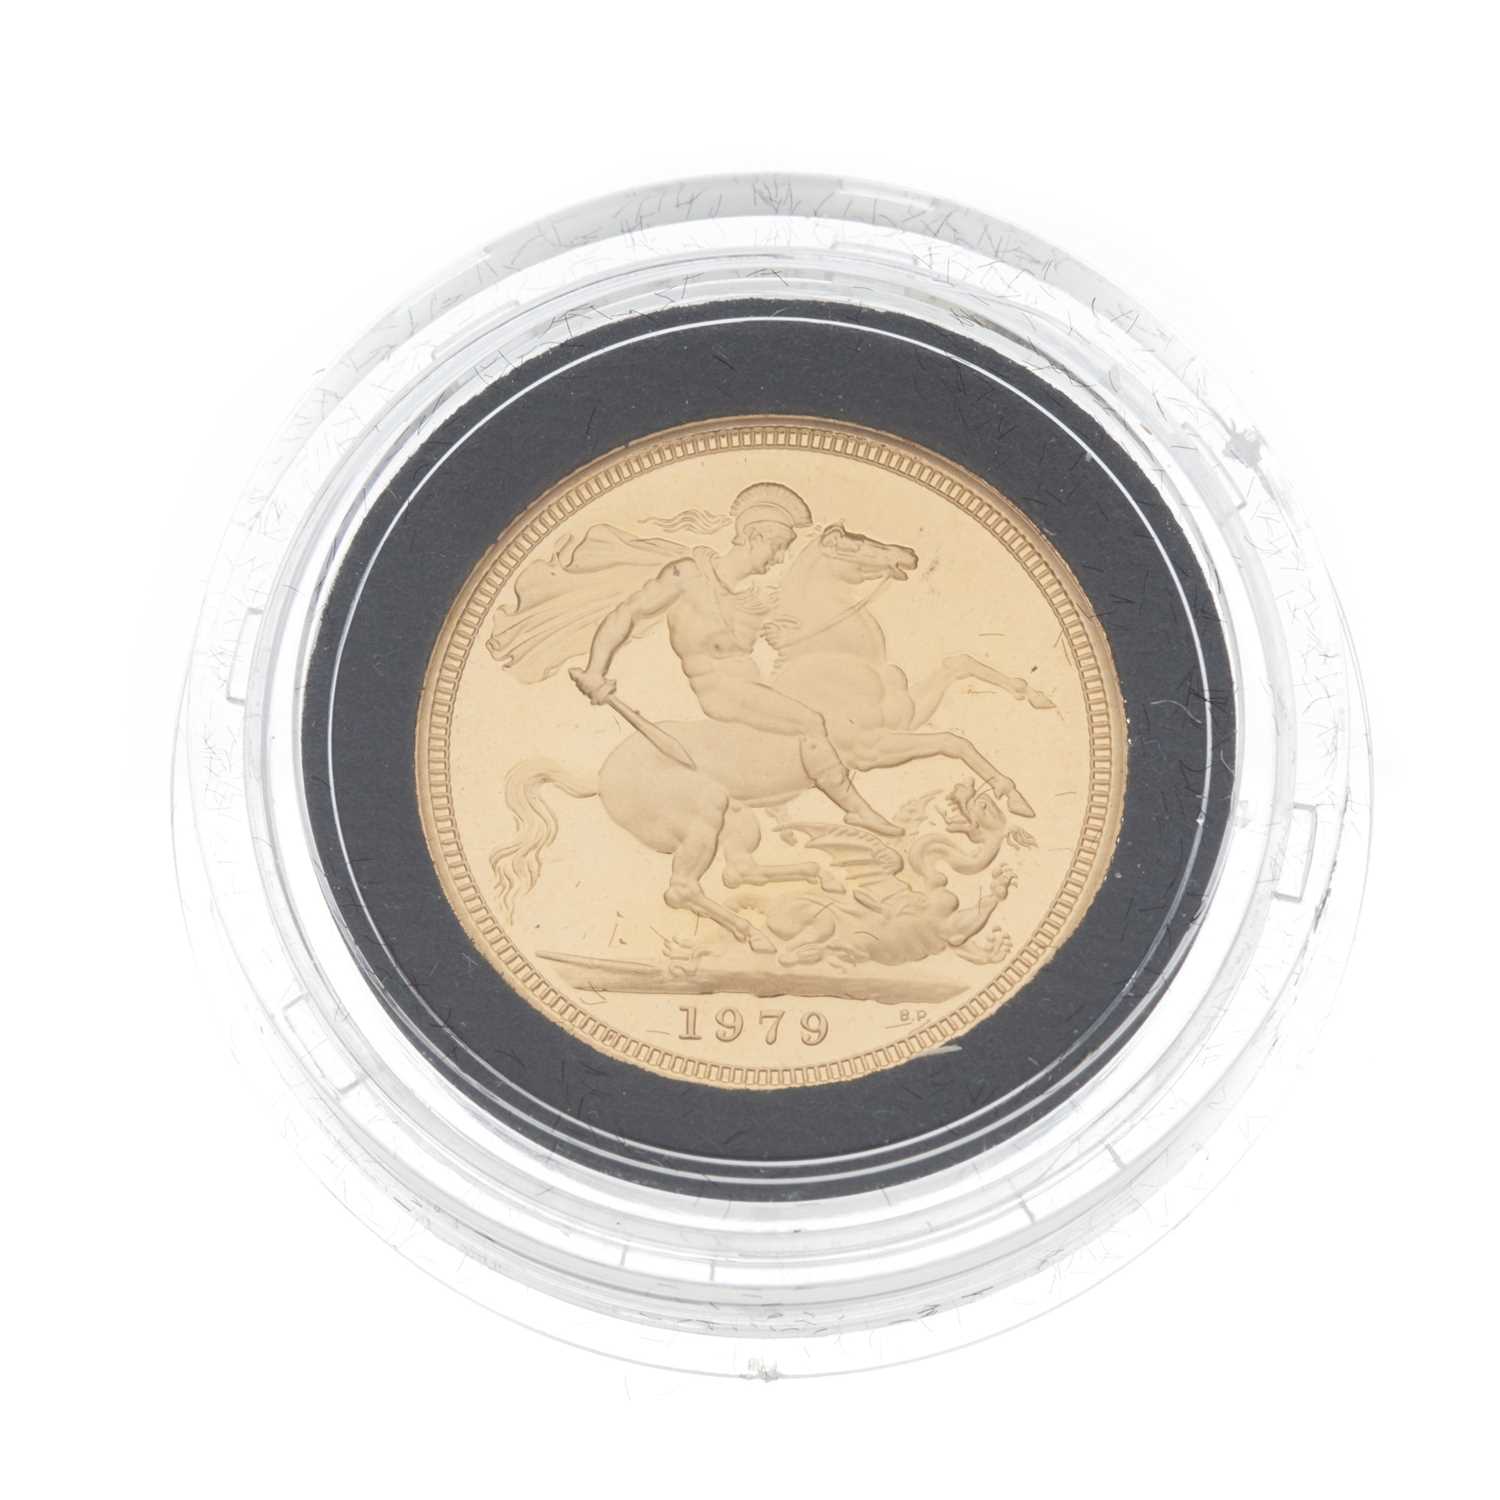 Elizabeth II, a 1979 gold proof full sovereign coin - Image 2 of 3